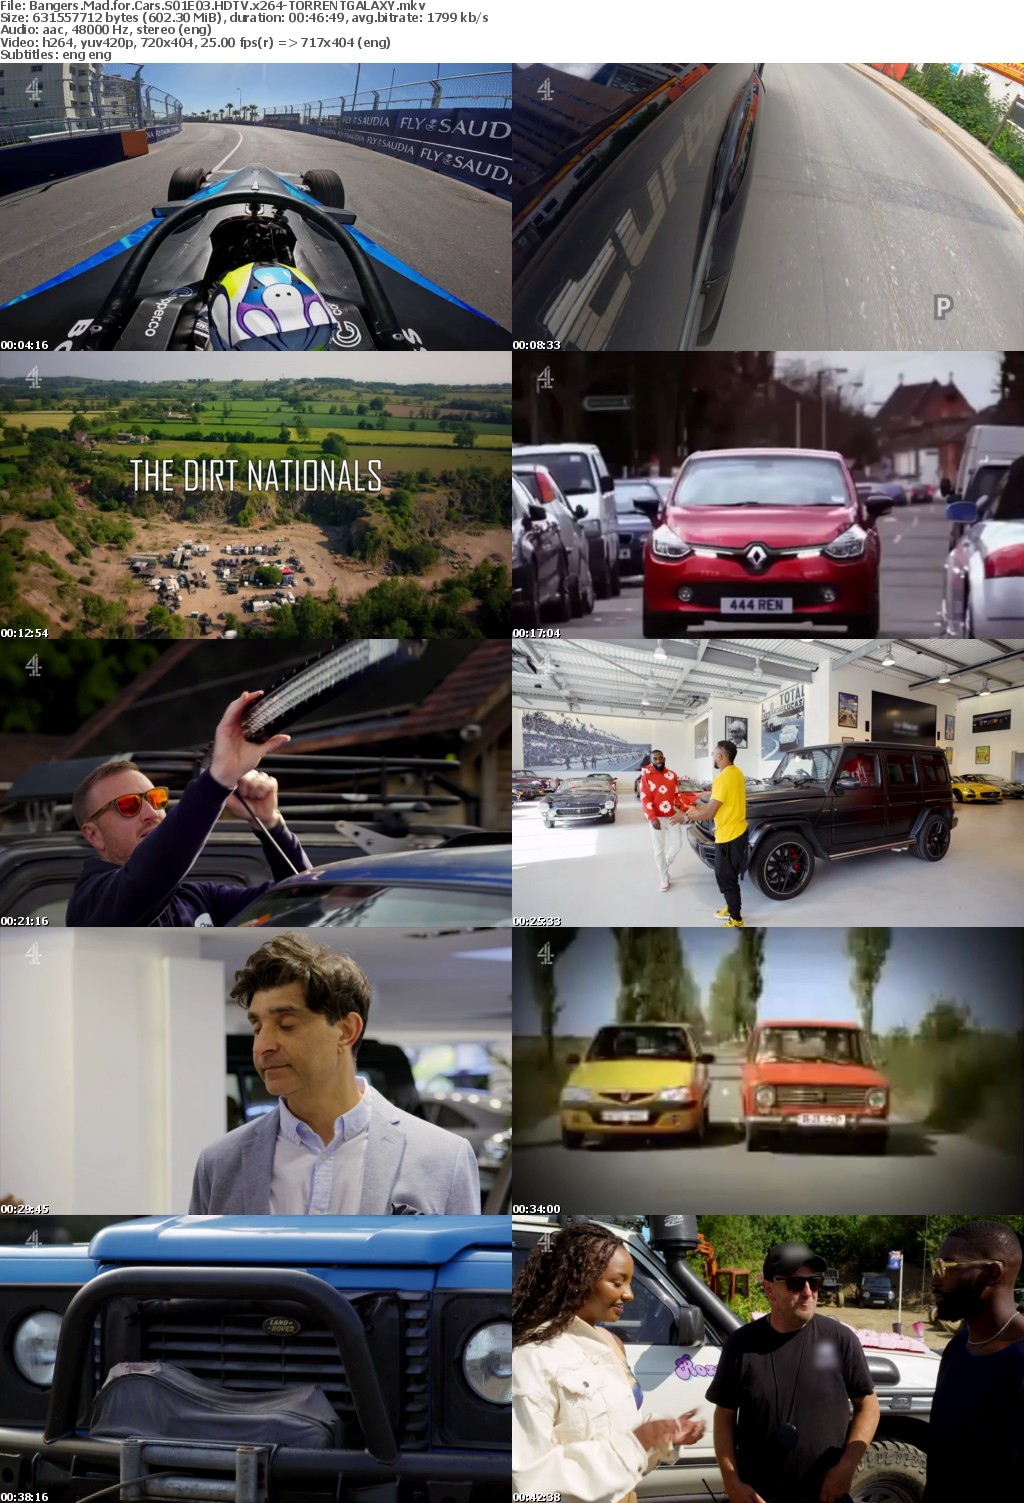 Bangers Mad for Cars S01E03 HDTV x264-GALAXY